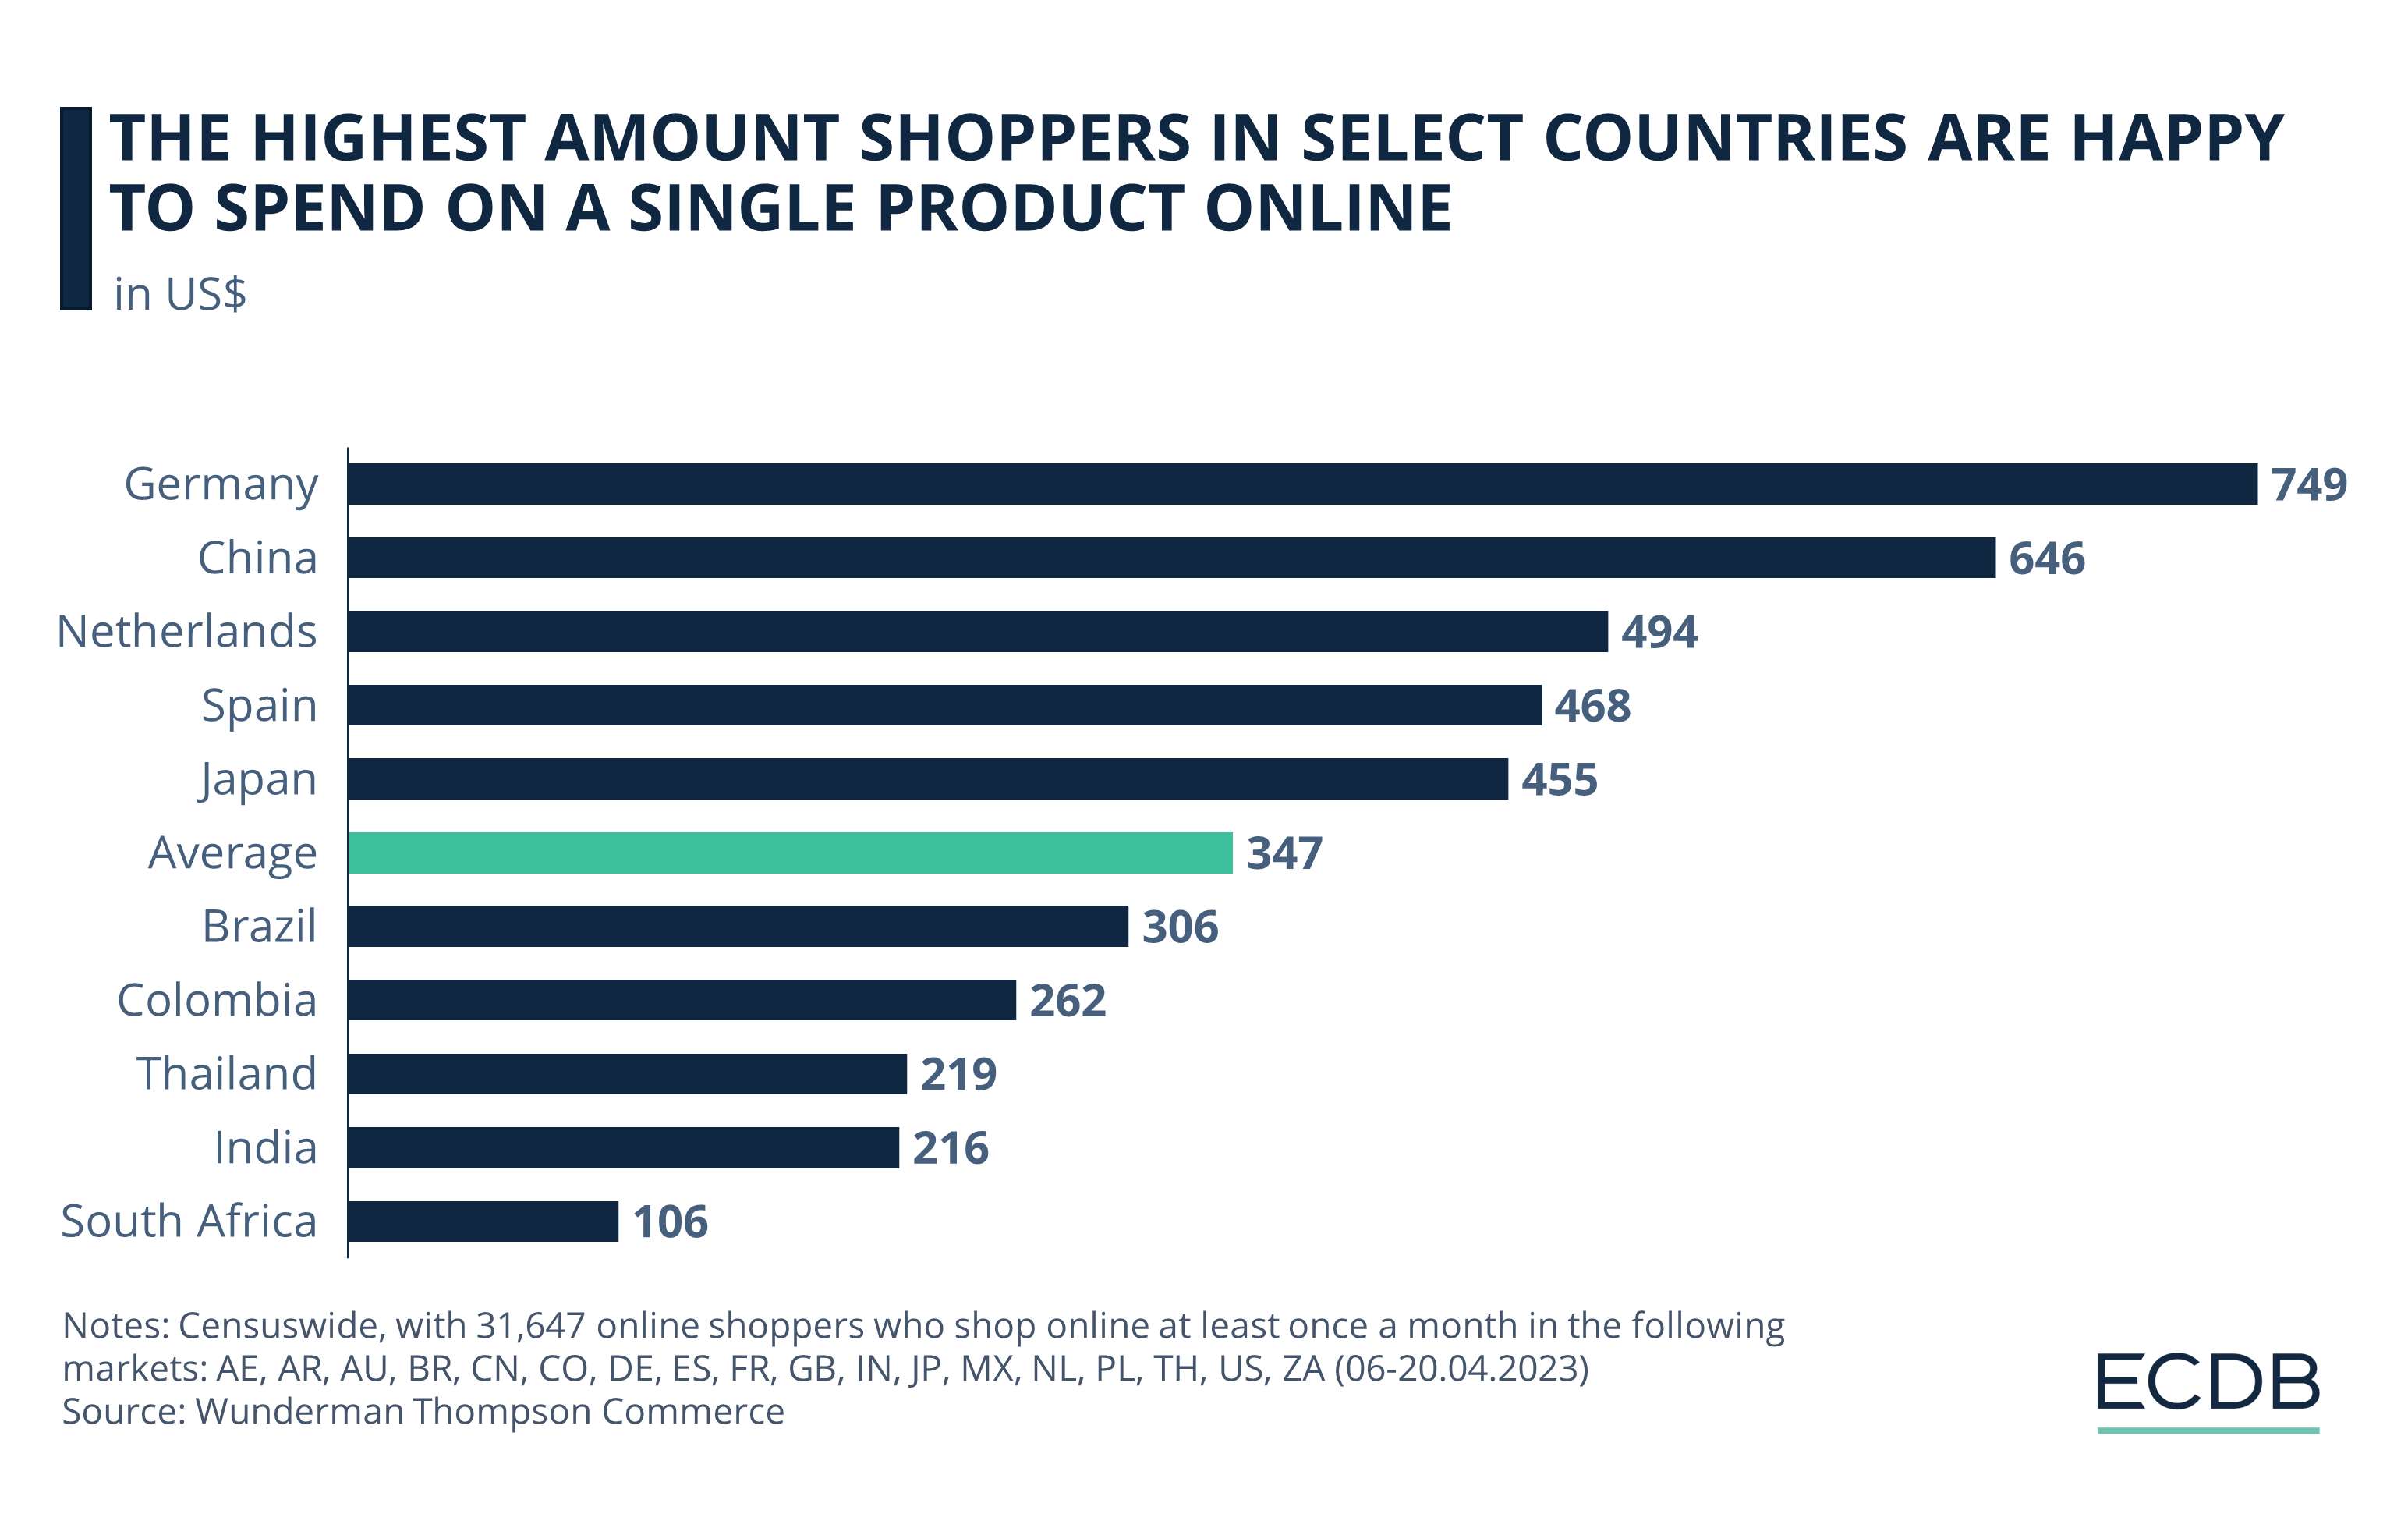 The Highest Amount Shoppers in Select Countries Are Happy to Spend on a Single Product Online